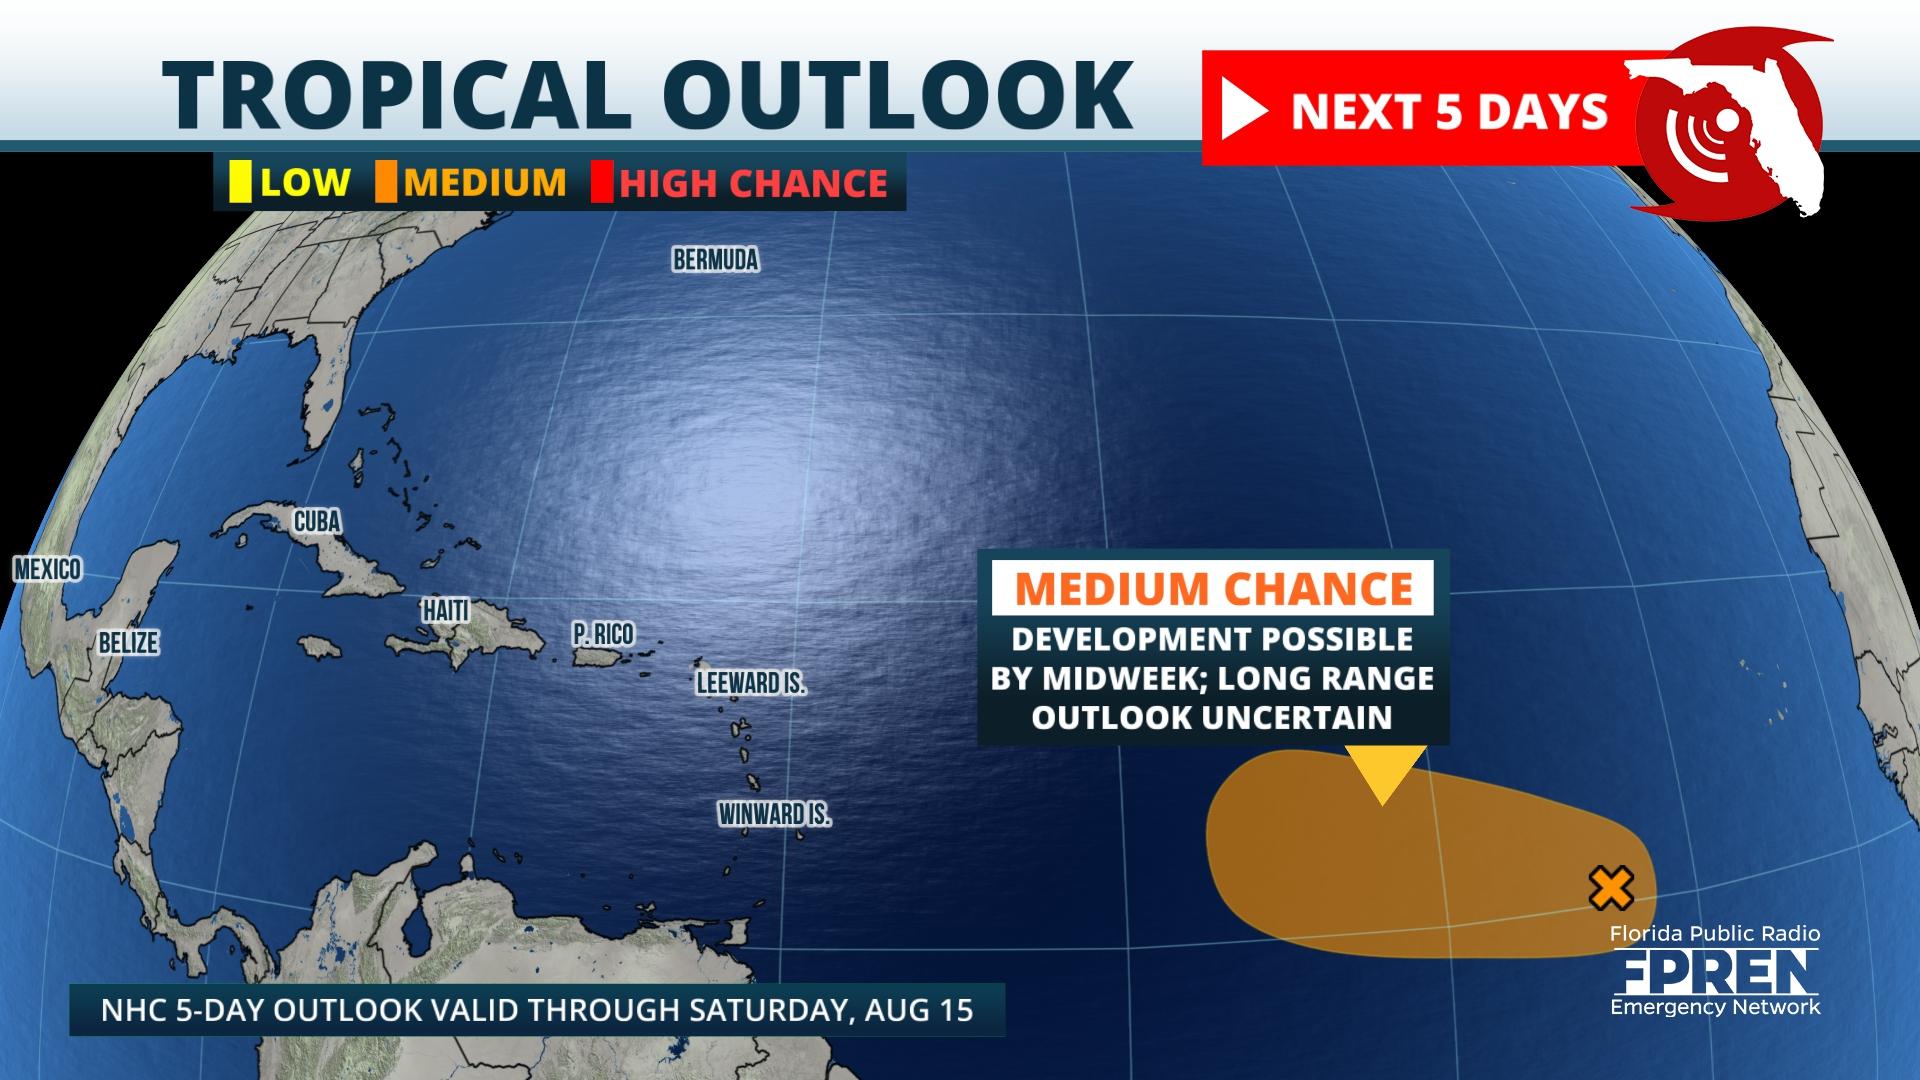 A New Tropical Storm Could Form in the Central Atlantic This Week | Florida Storms